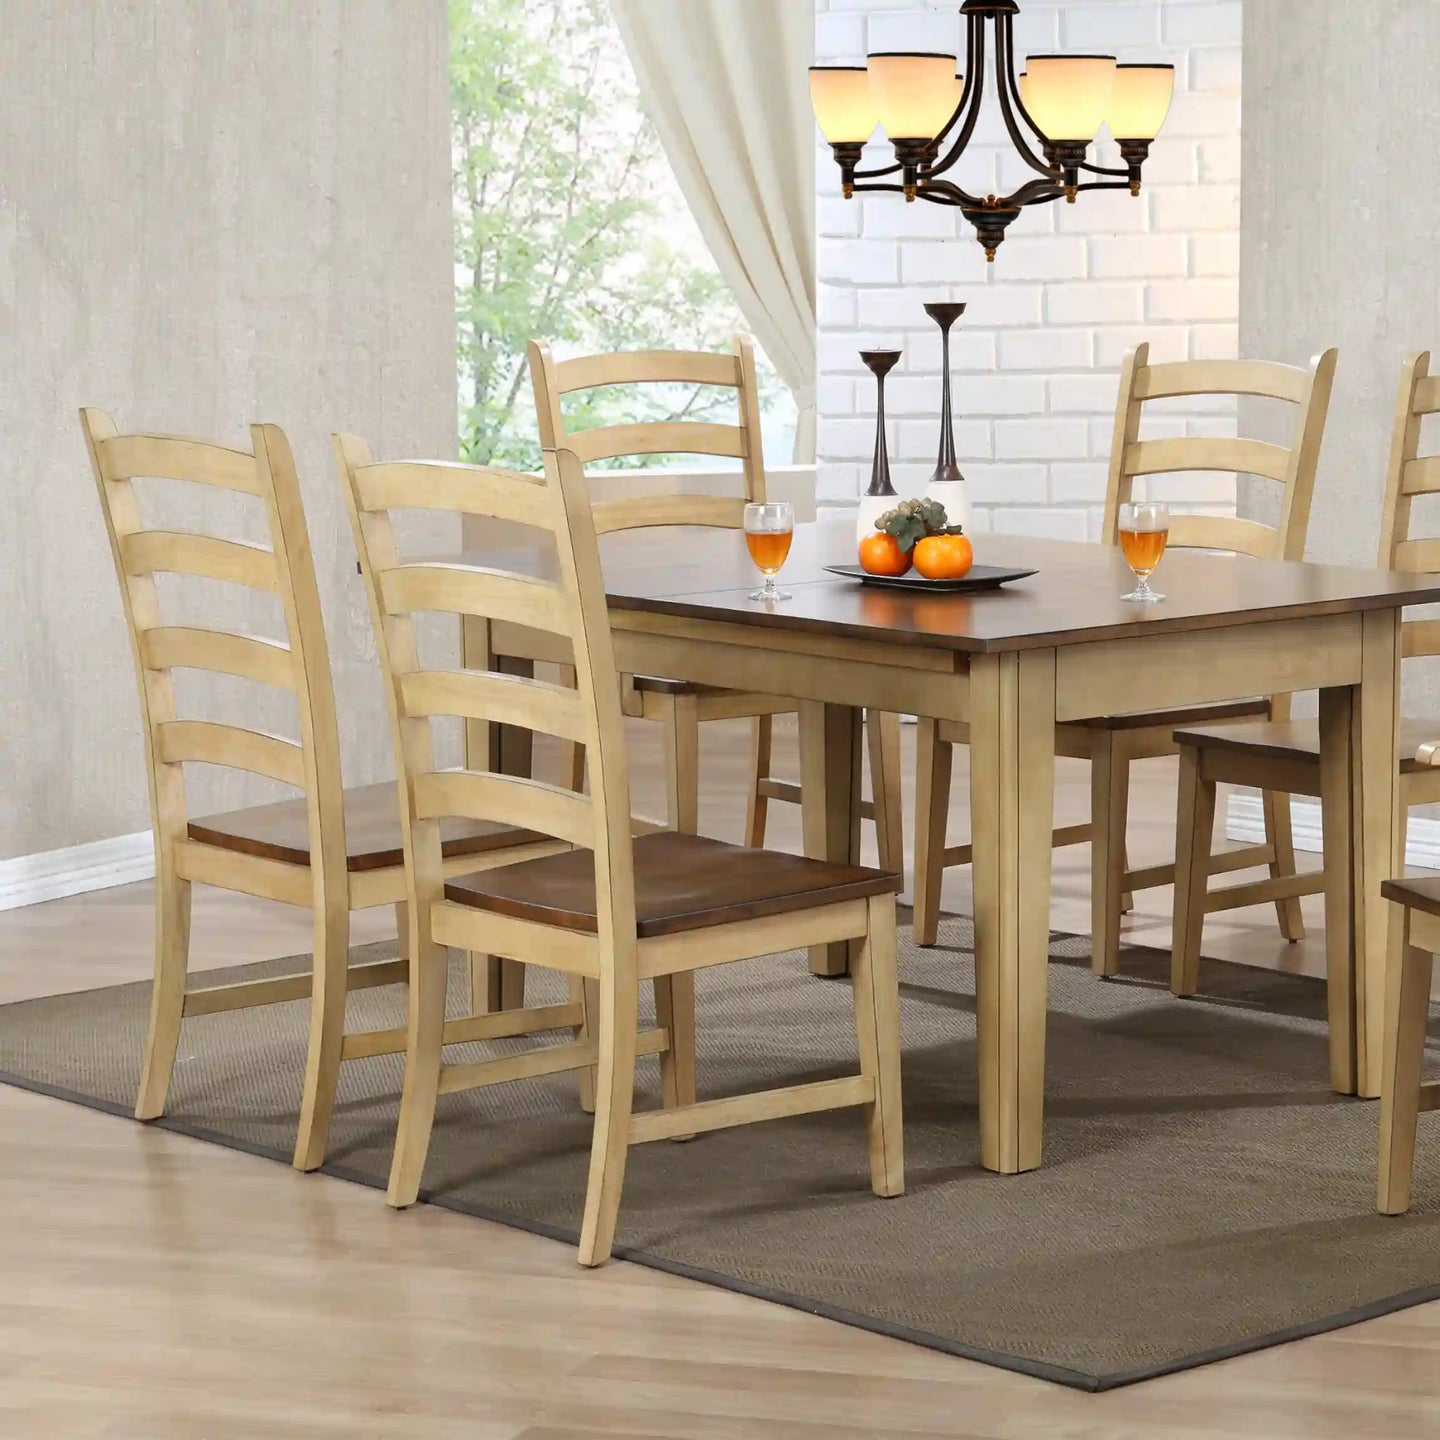 Sunset Trading Brook Ladder Back Dining Chair | Set of 2